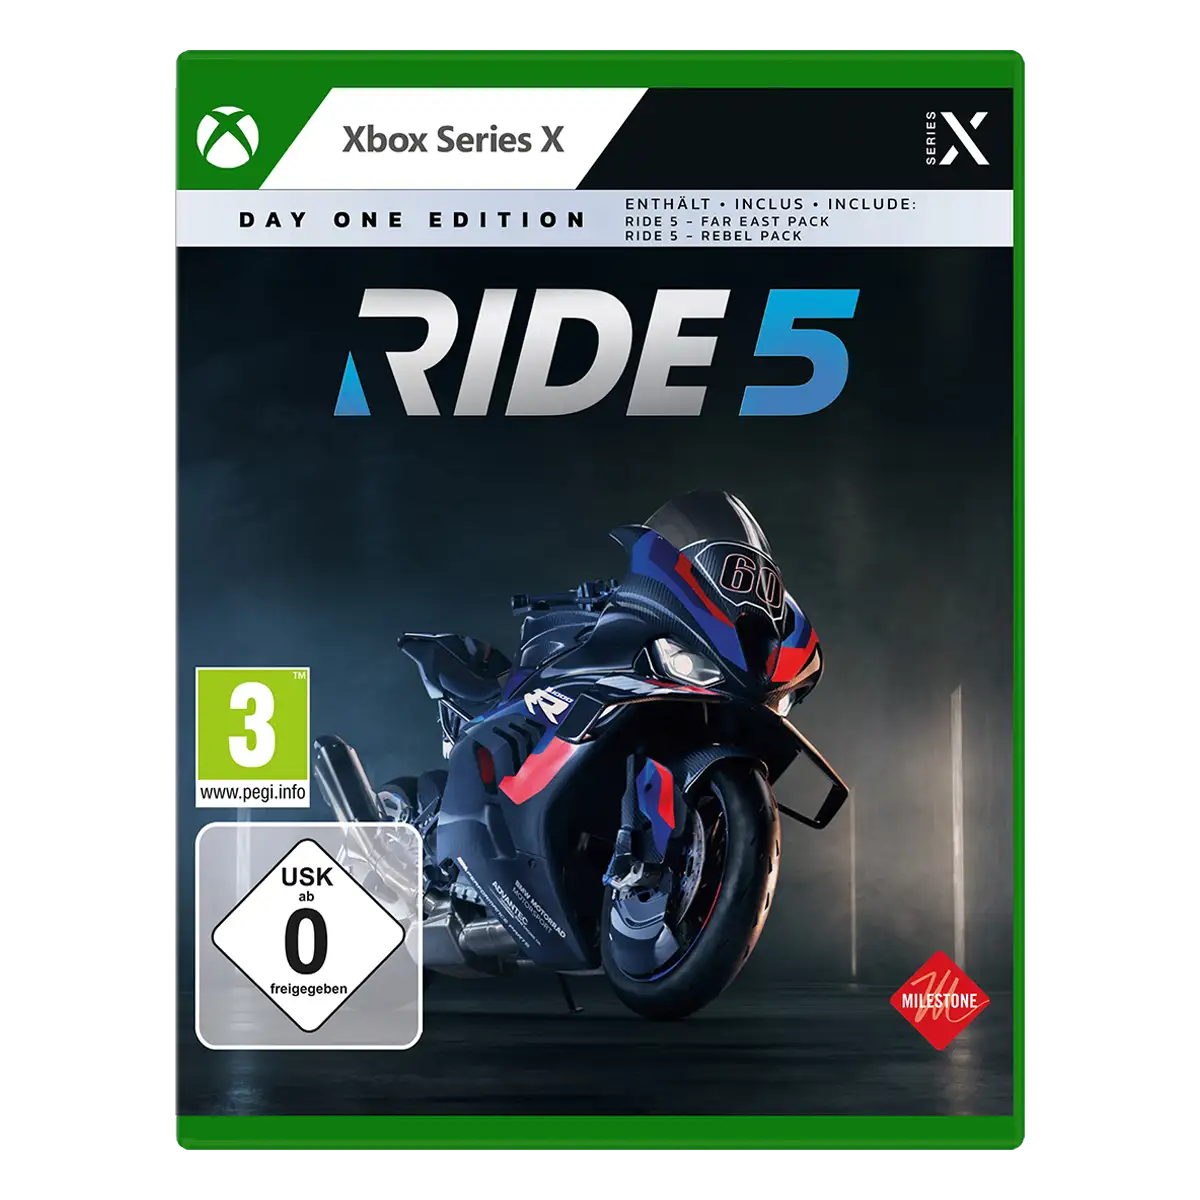 RIDE 5 Day One Edition (Xbox Series X)